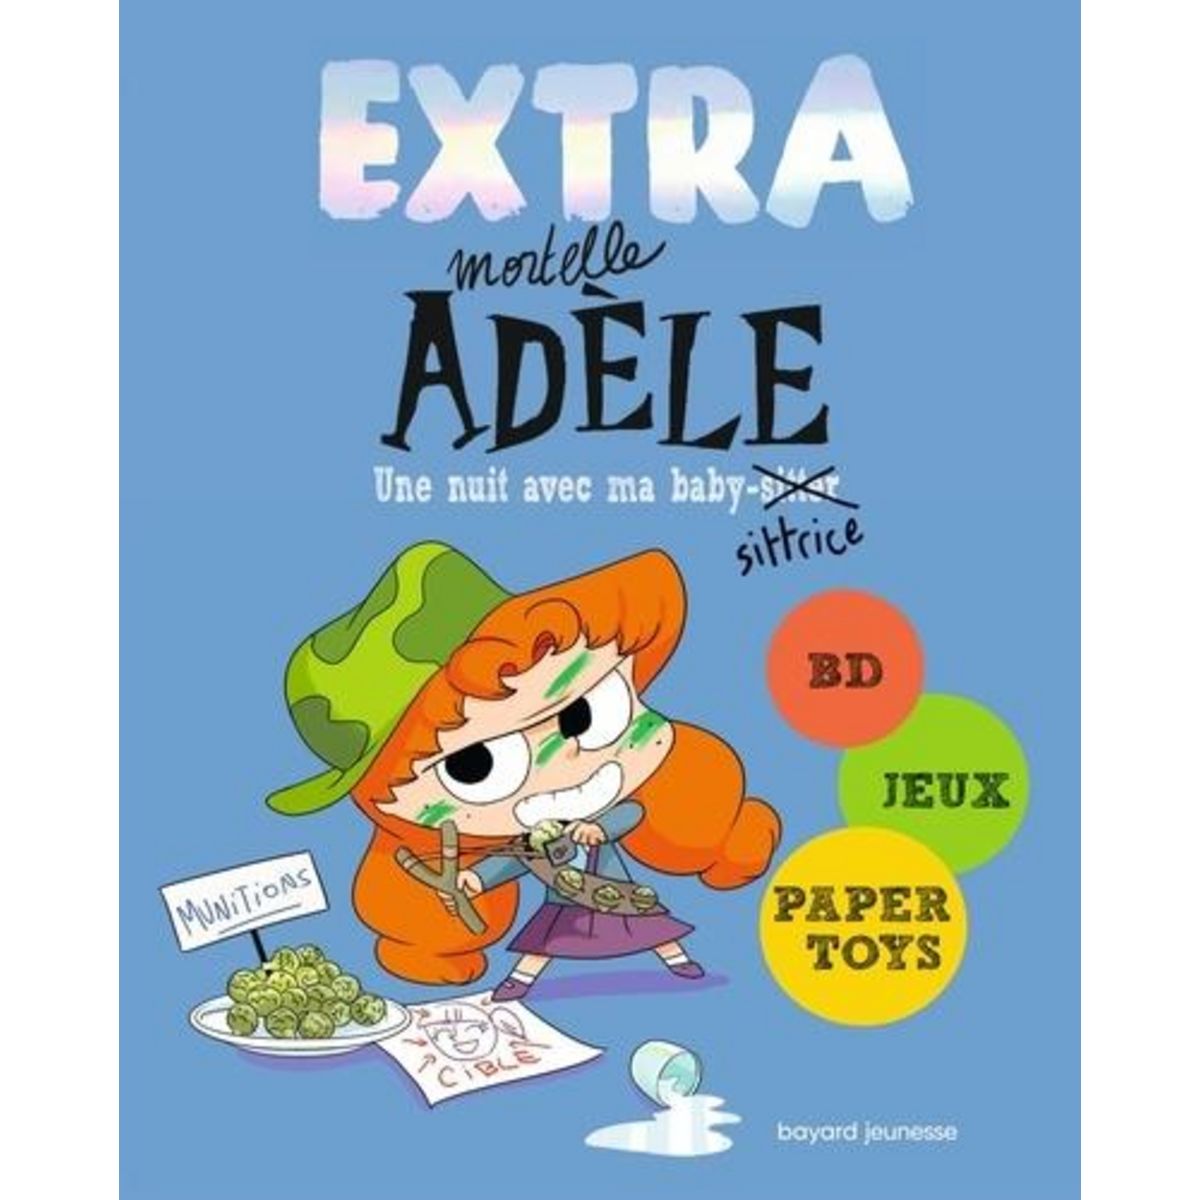 EXTRA MORTELLE ADELE TOME 1 : UNE NUIT CHEZ MA BABY-SITTRICE, Mr Tan pas  cher 